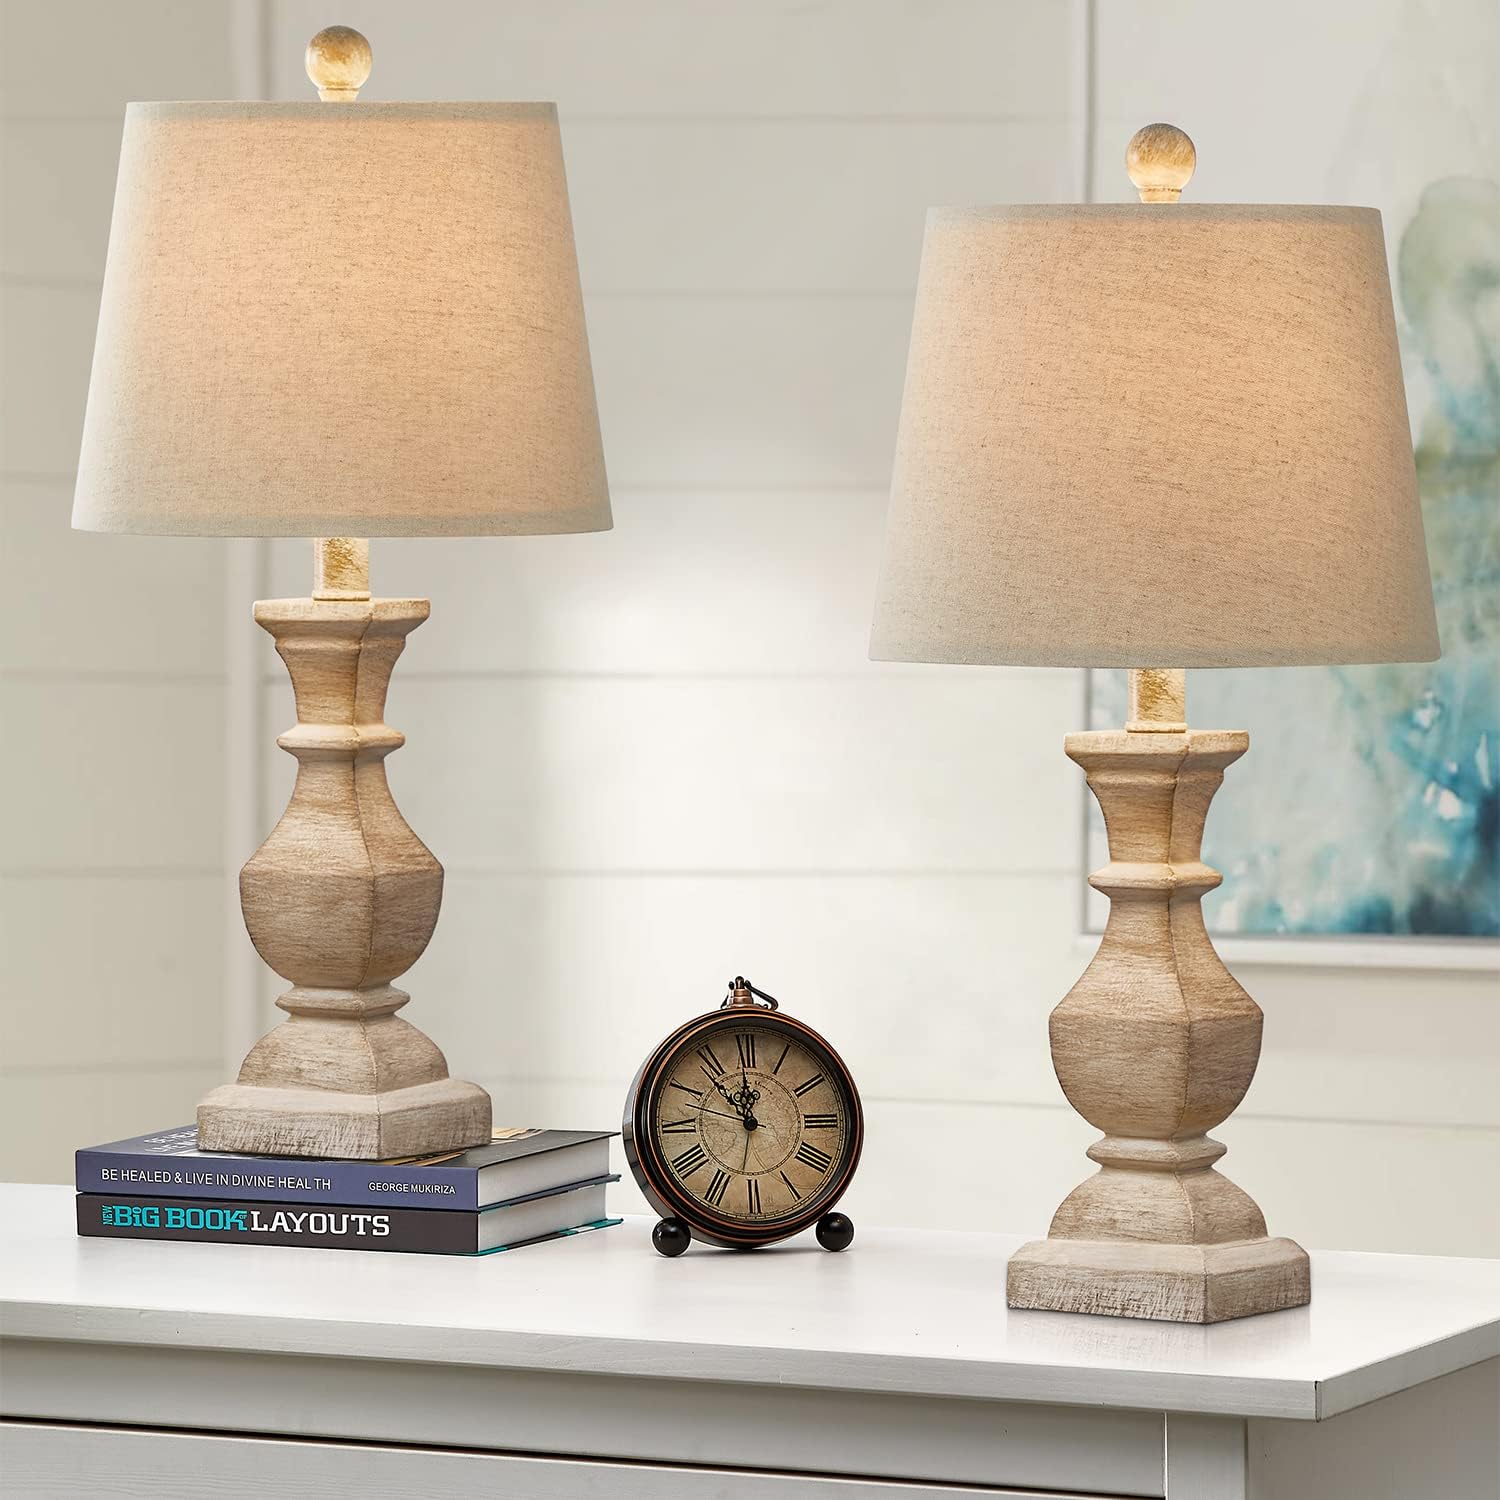 Cute lamps and easy to put together. Quality is good and they are light weight. I love them.